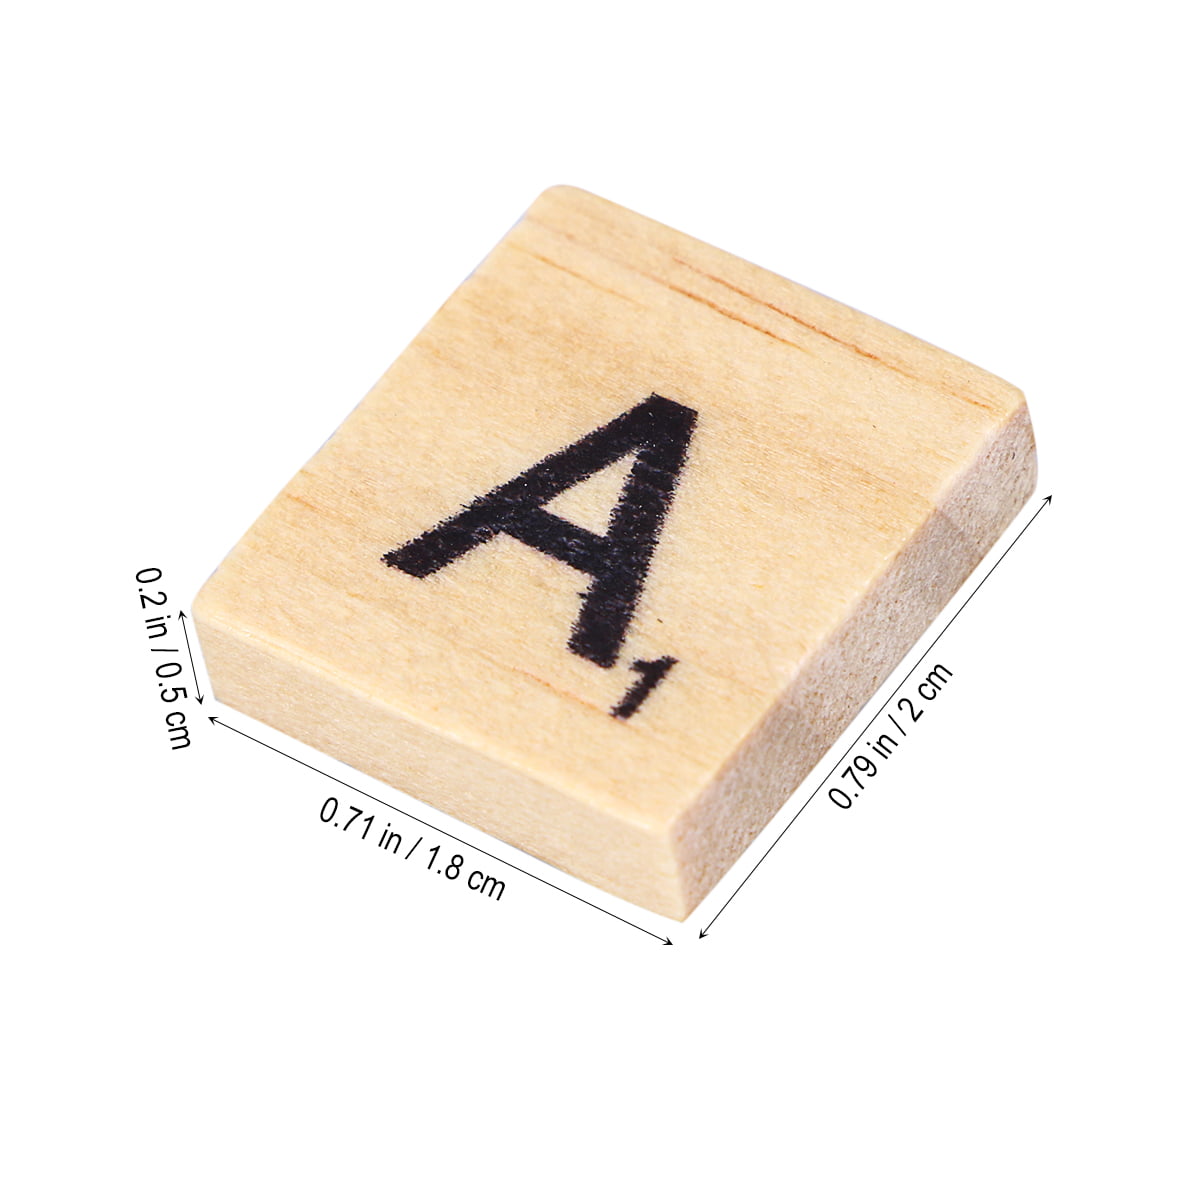 Spare SCRABBLE tile letter R Complete your game/arts & crafts 